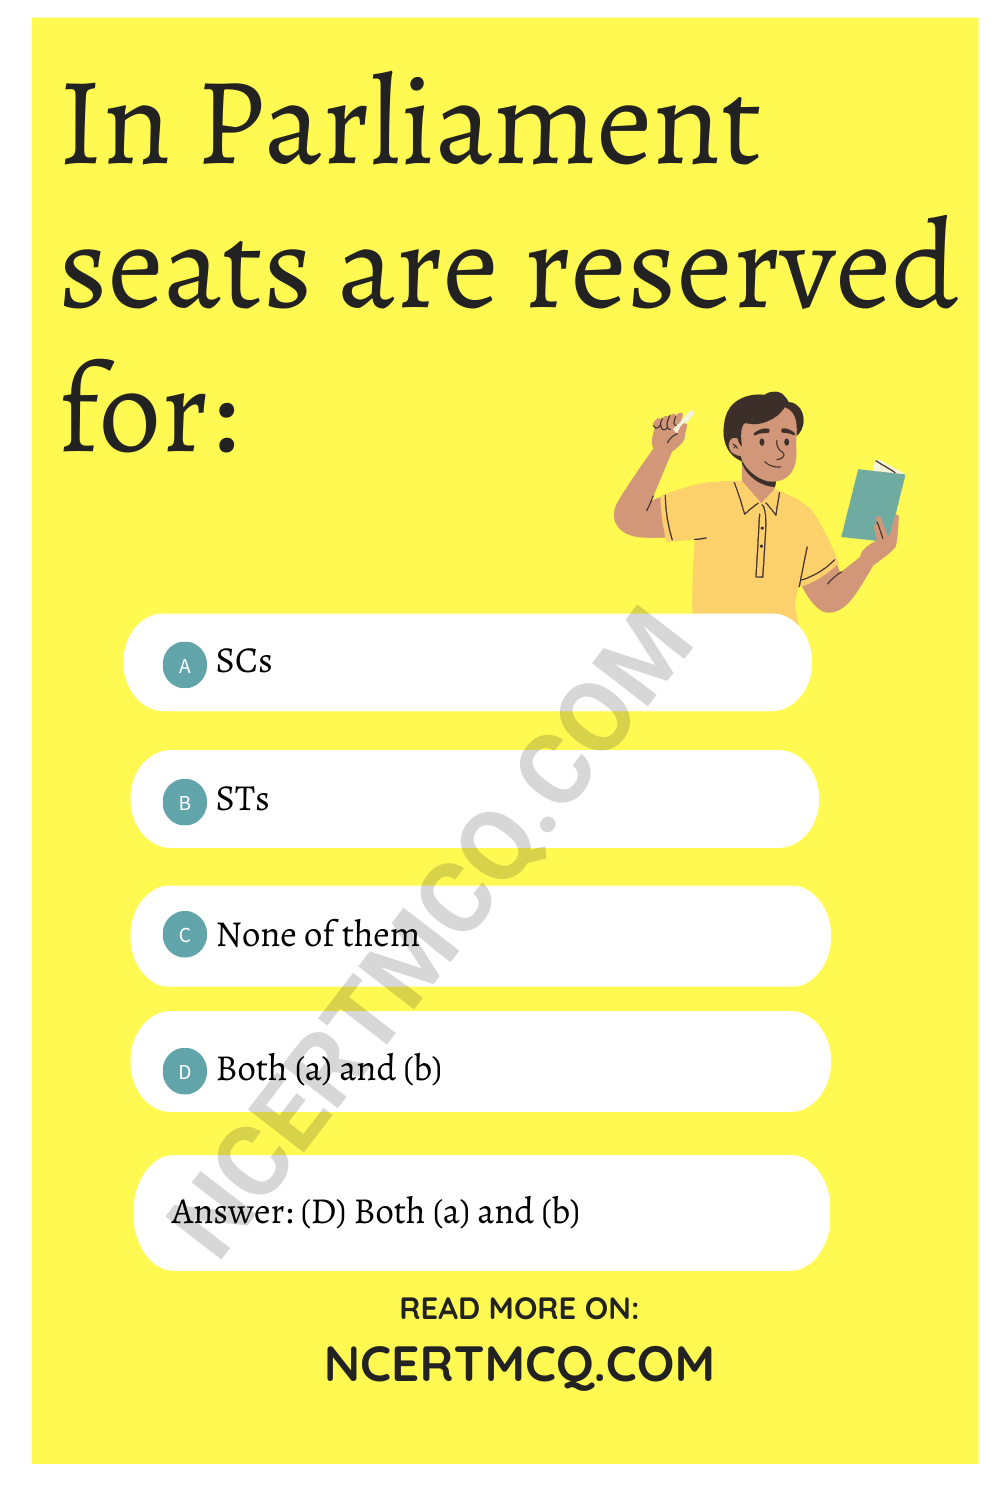 In Parliament seats are reserved for: